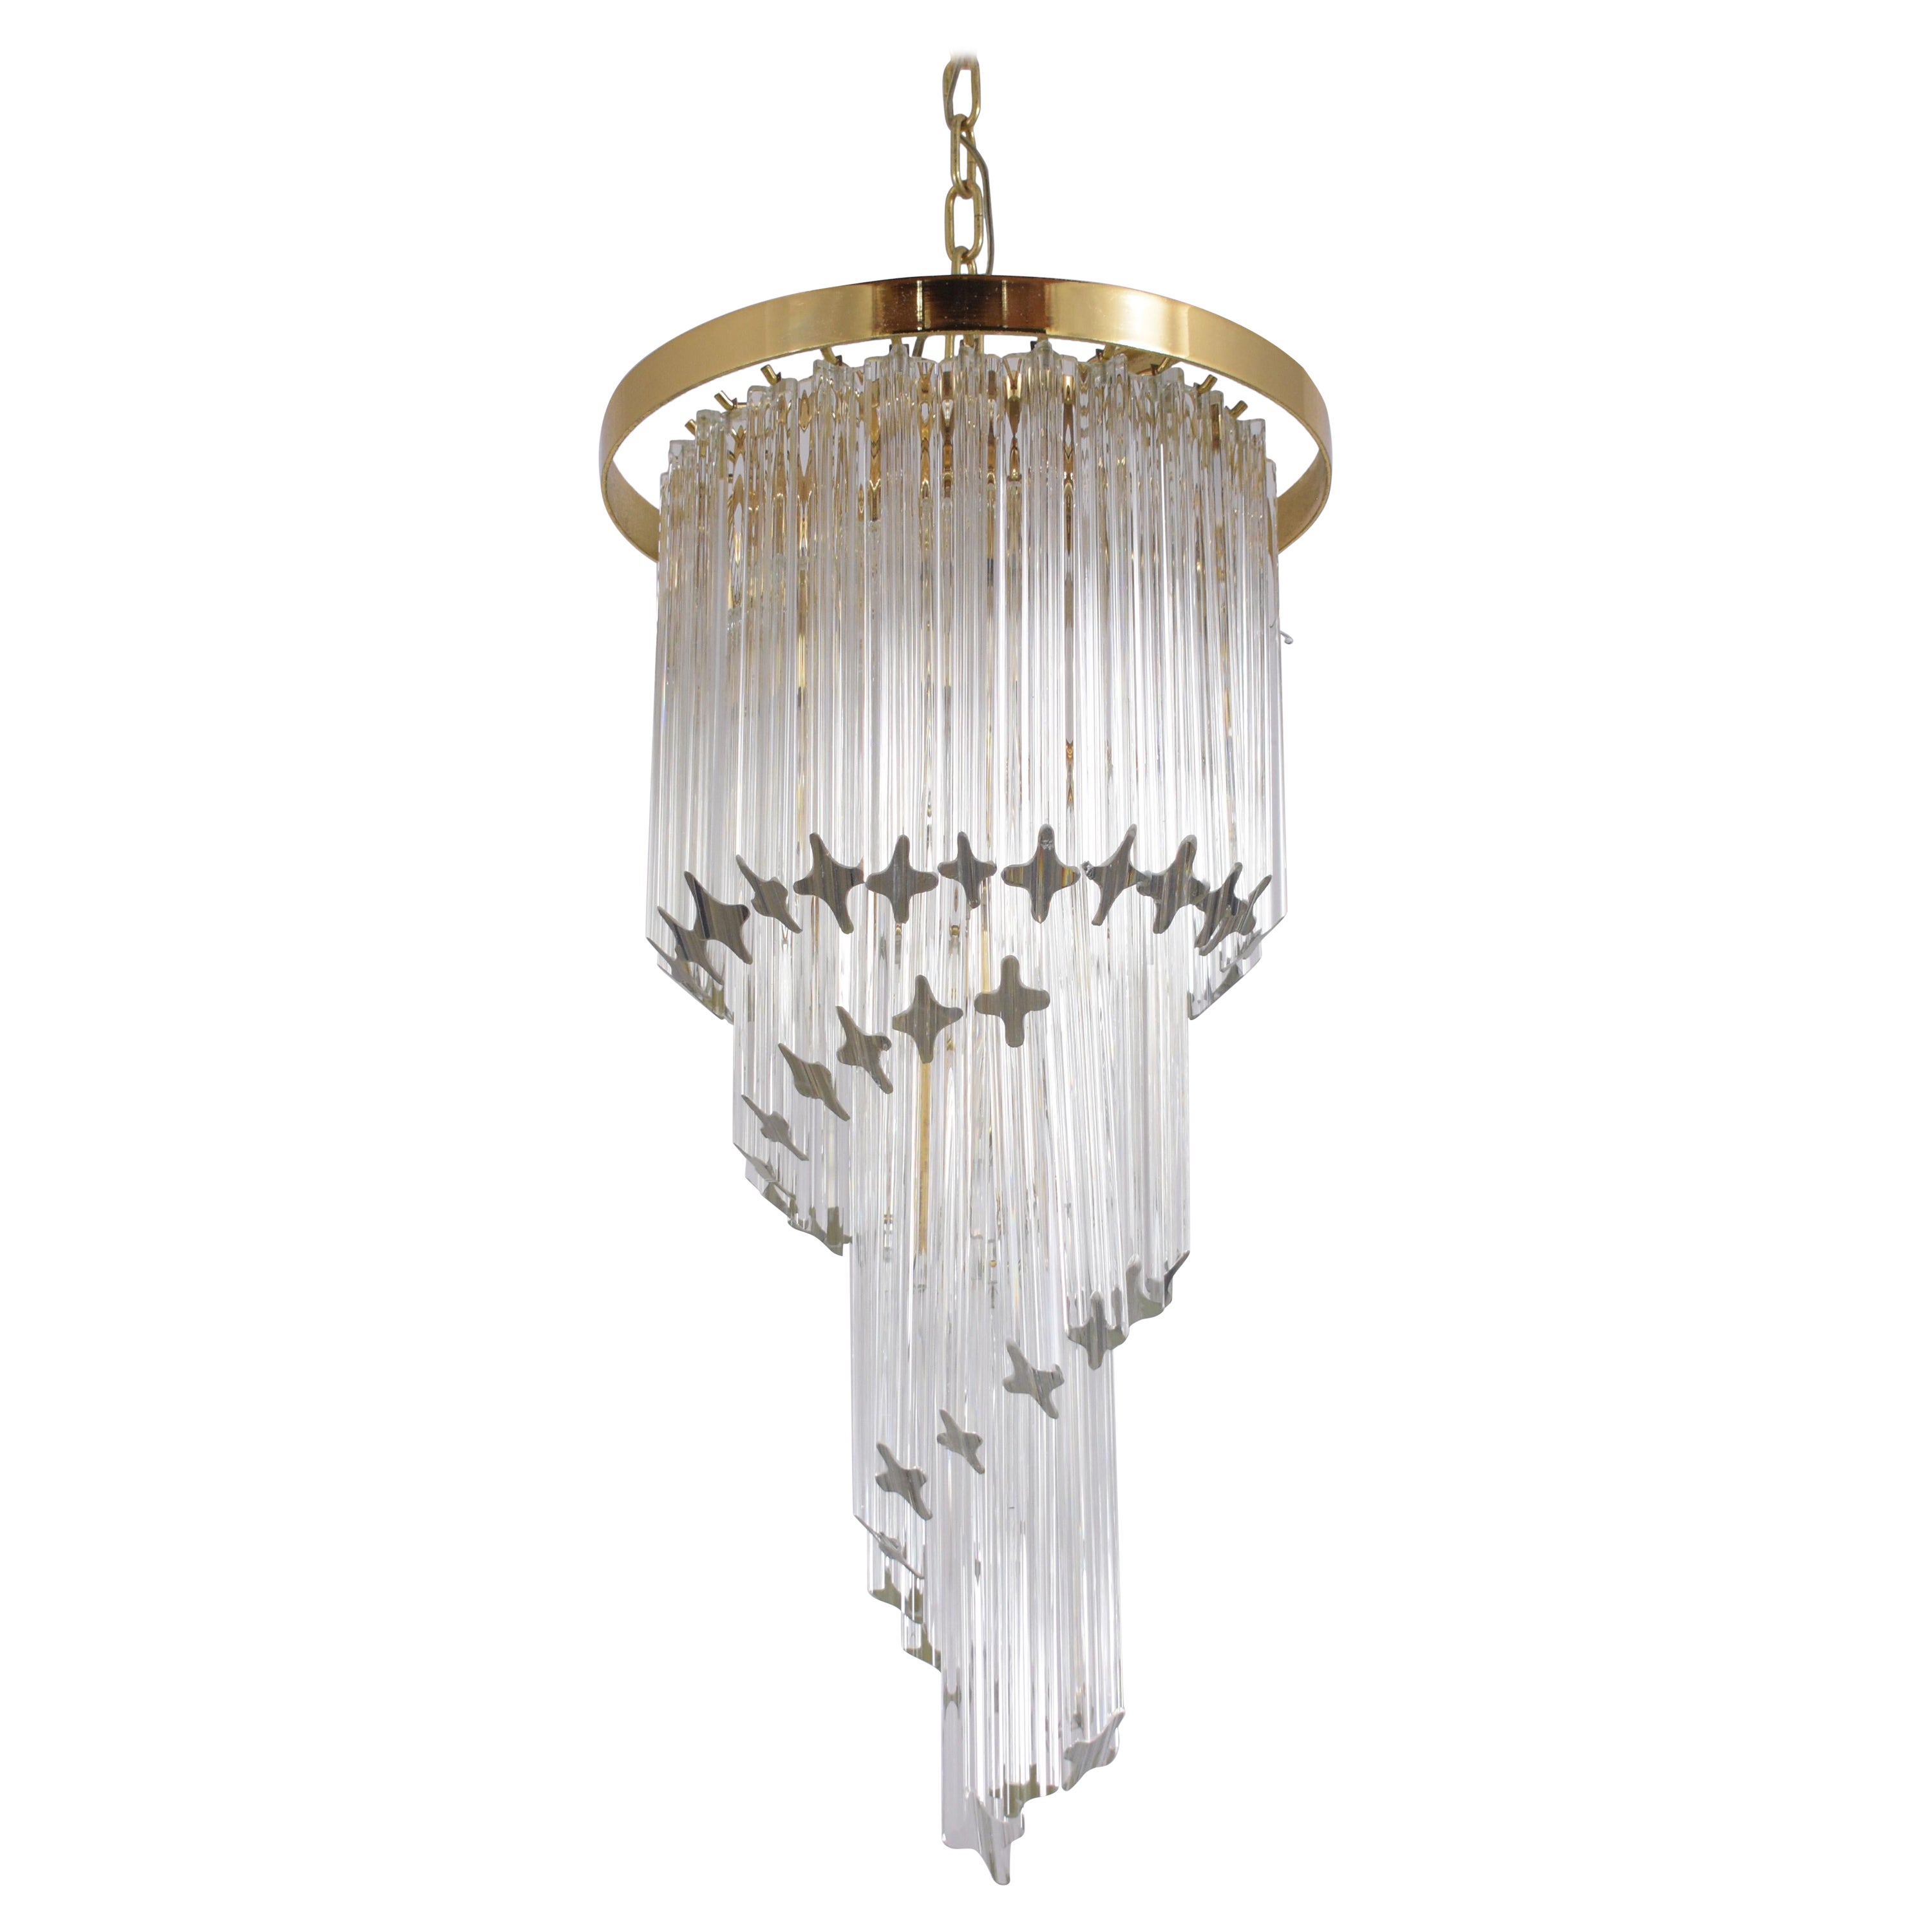 Restored Vintage Brass and Glass Drop Pendant Chandelier with Spiral Pattern